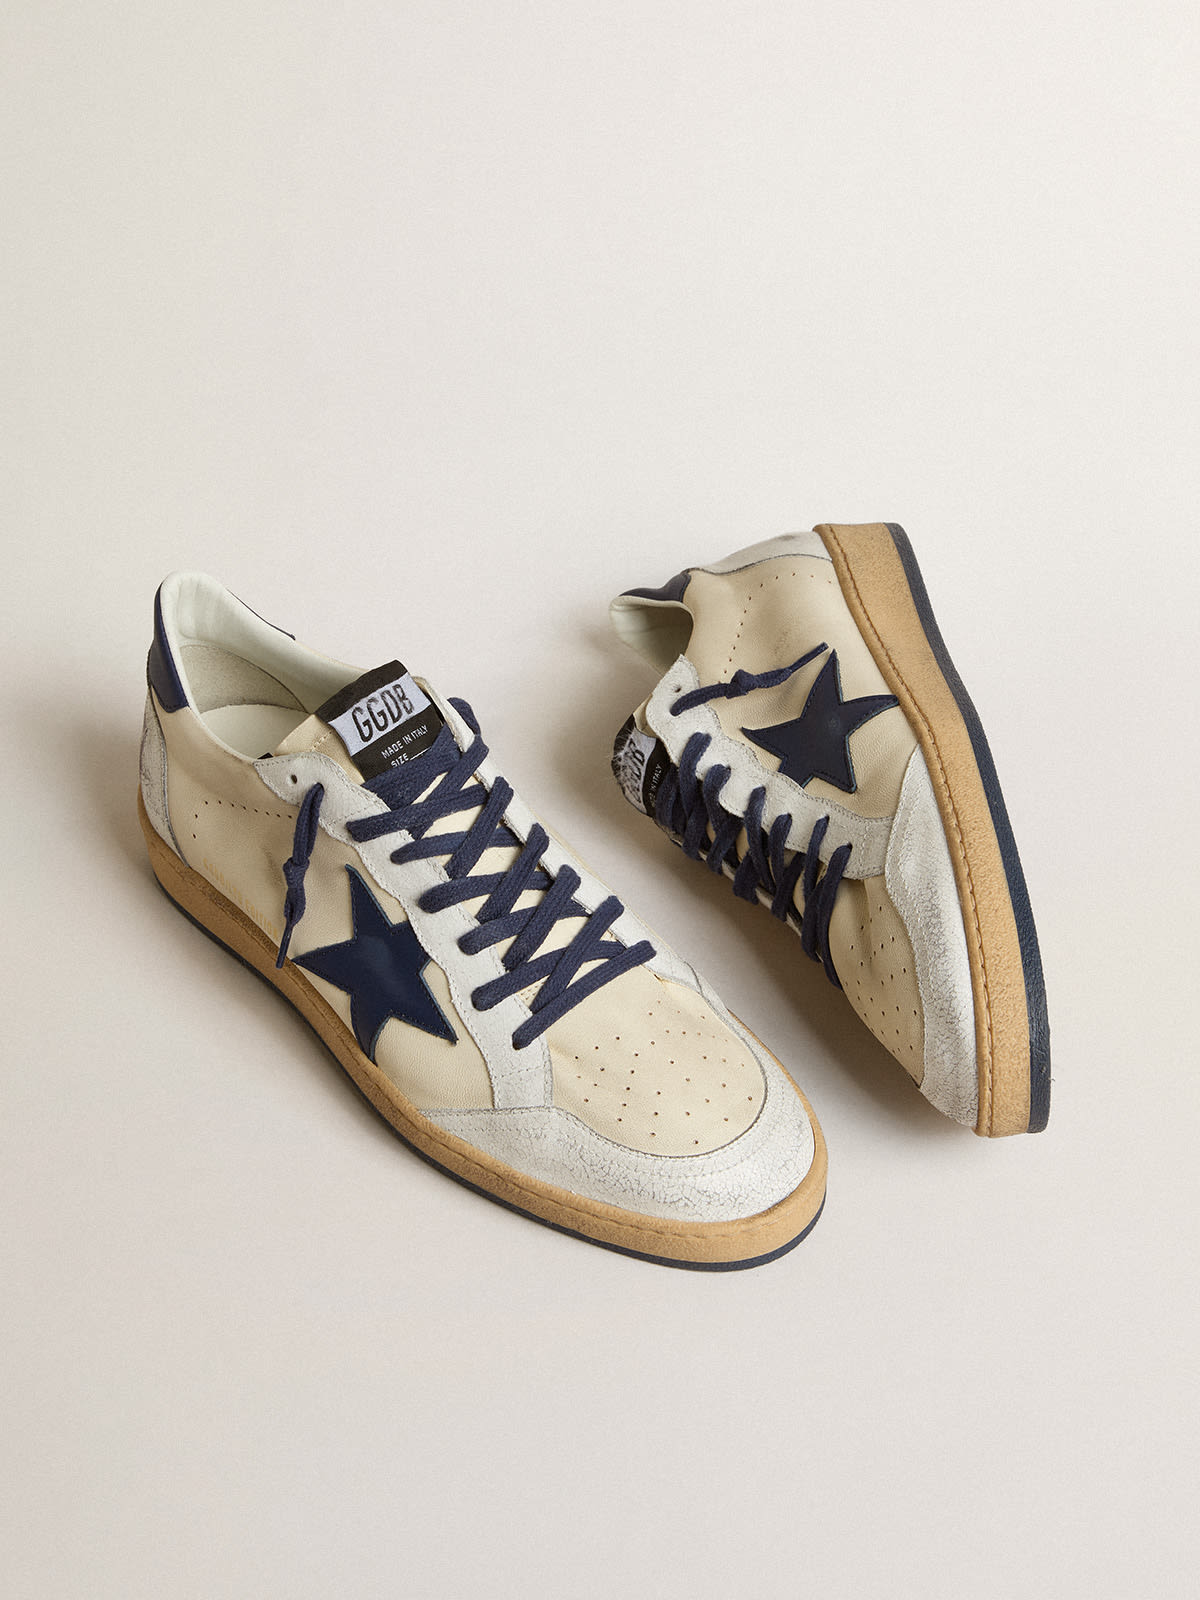 Golden Goose - Ball Star LTD in cream nappa with blue leather star and heel tab in 